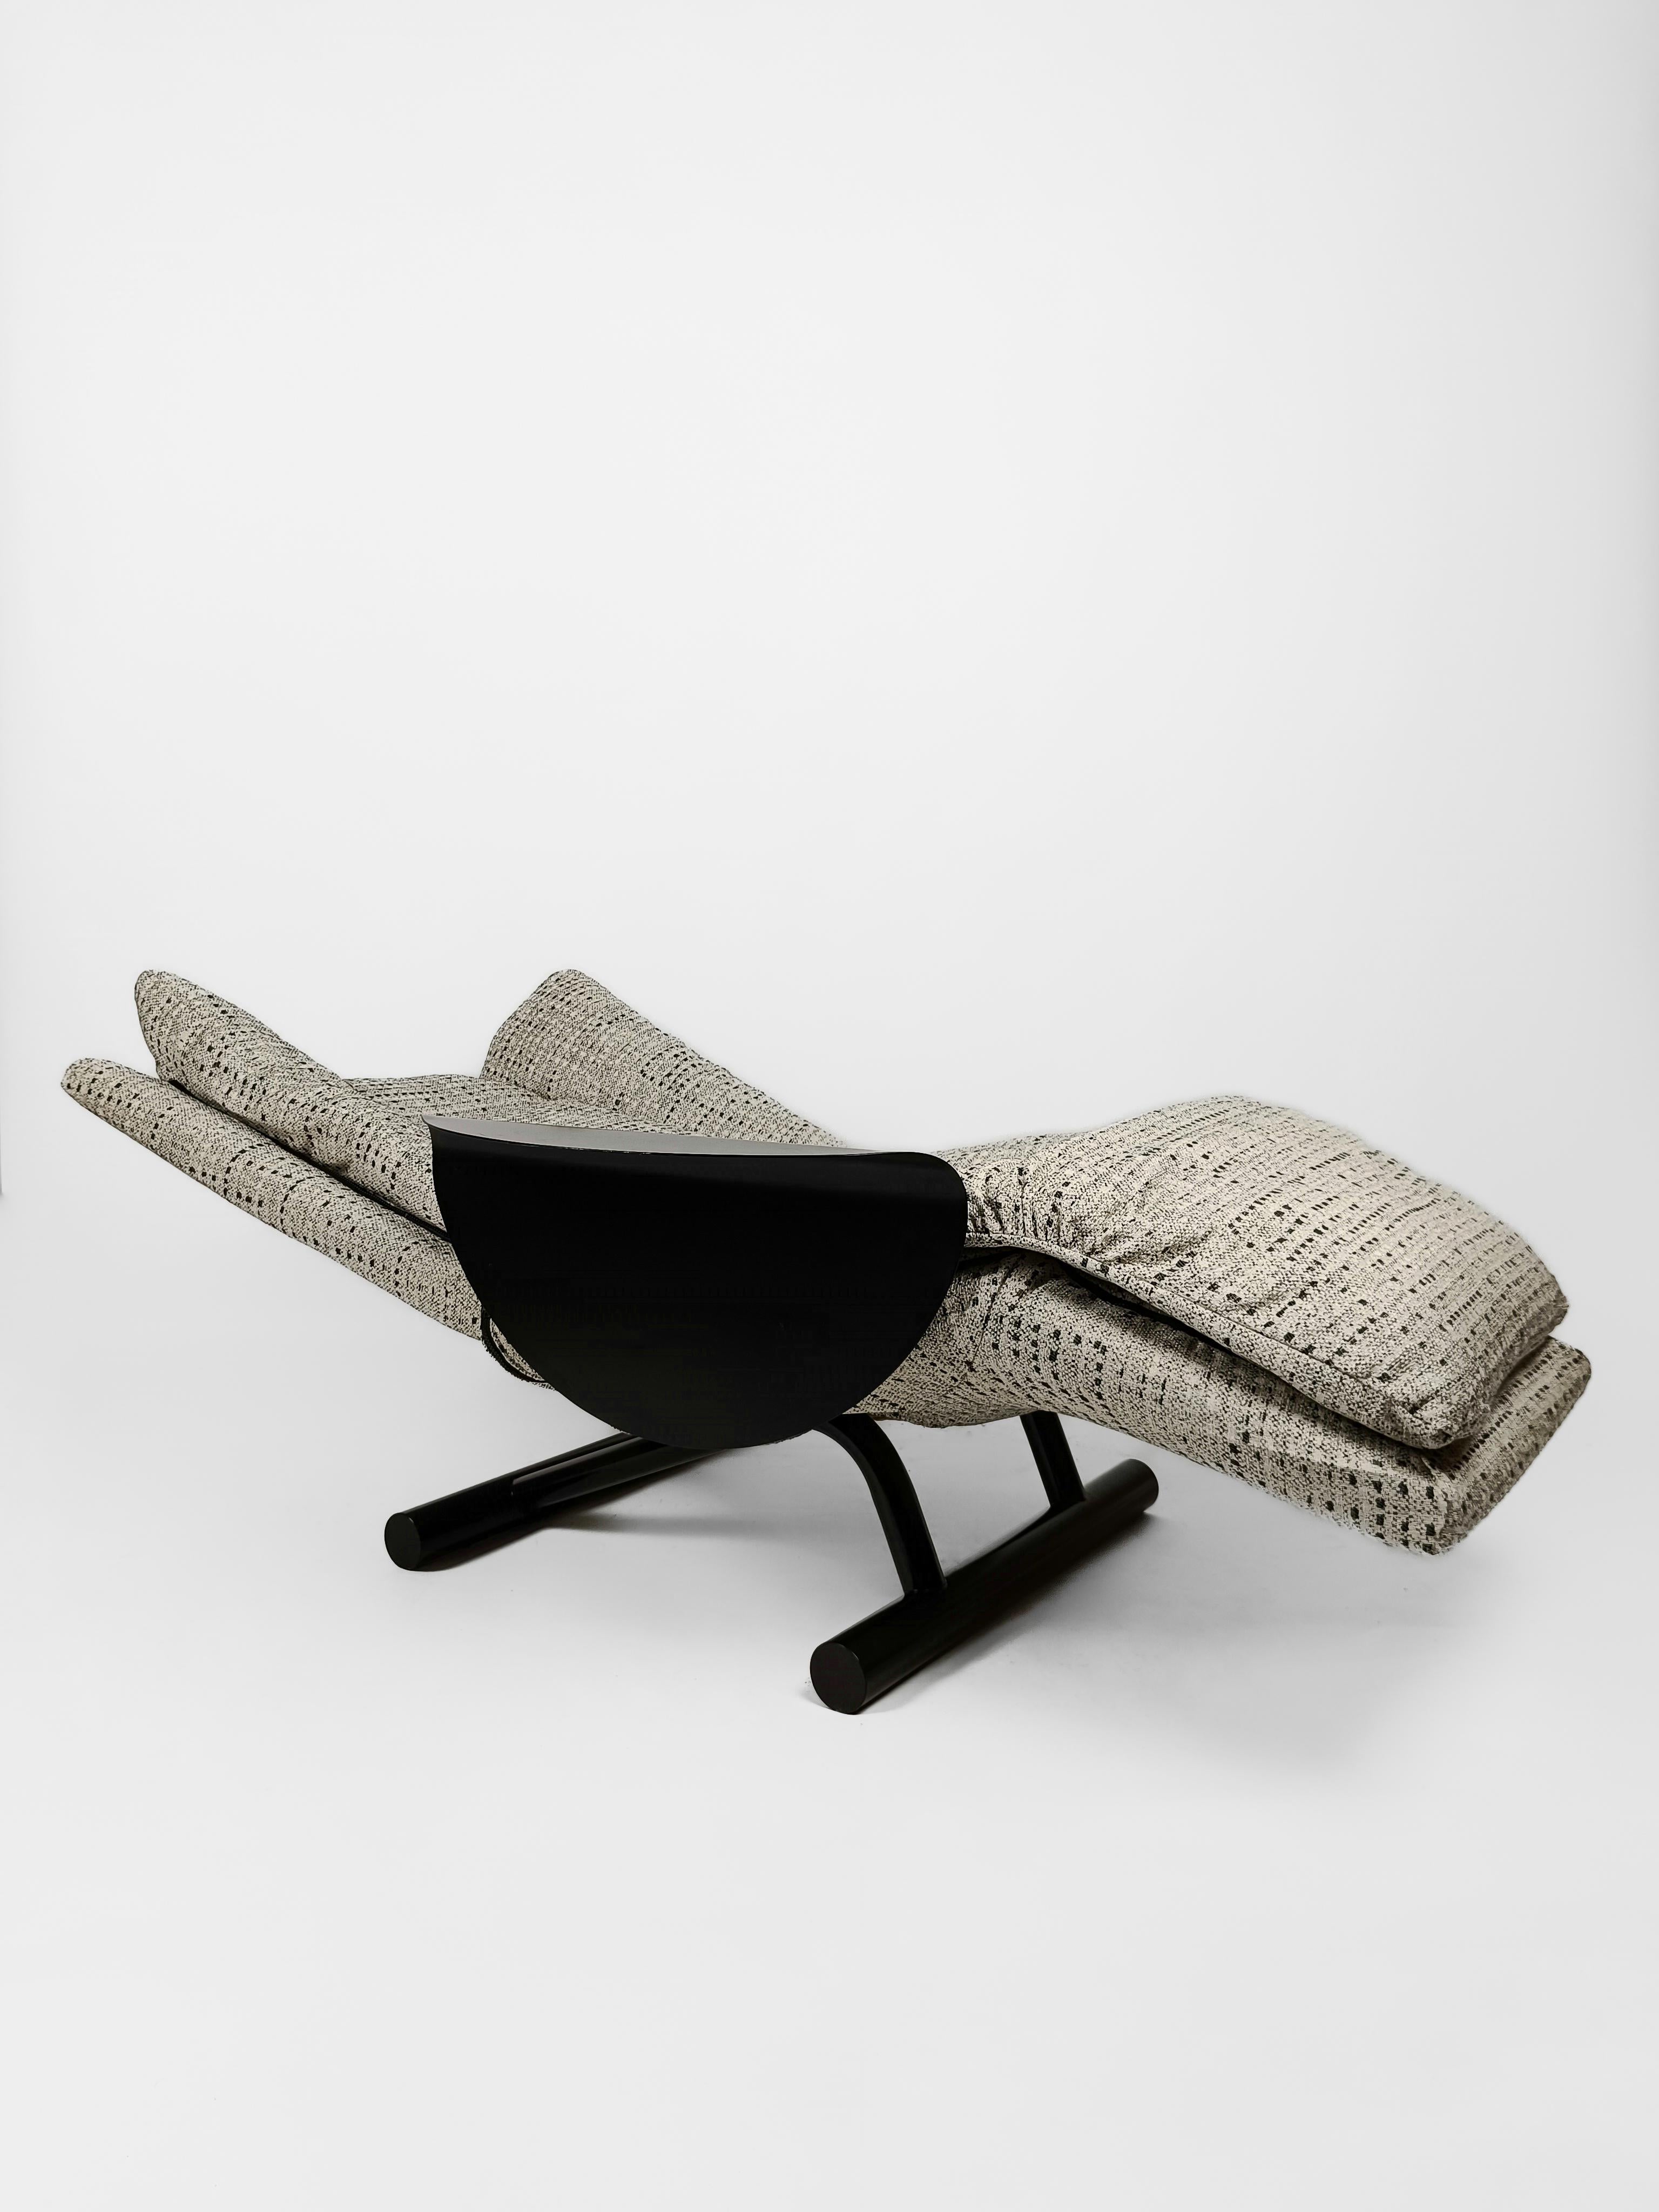 Italian Post-Modern Reclining Lounge Chair, Chaise by Cinova, 1980s  For Sale 1